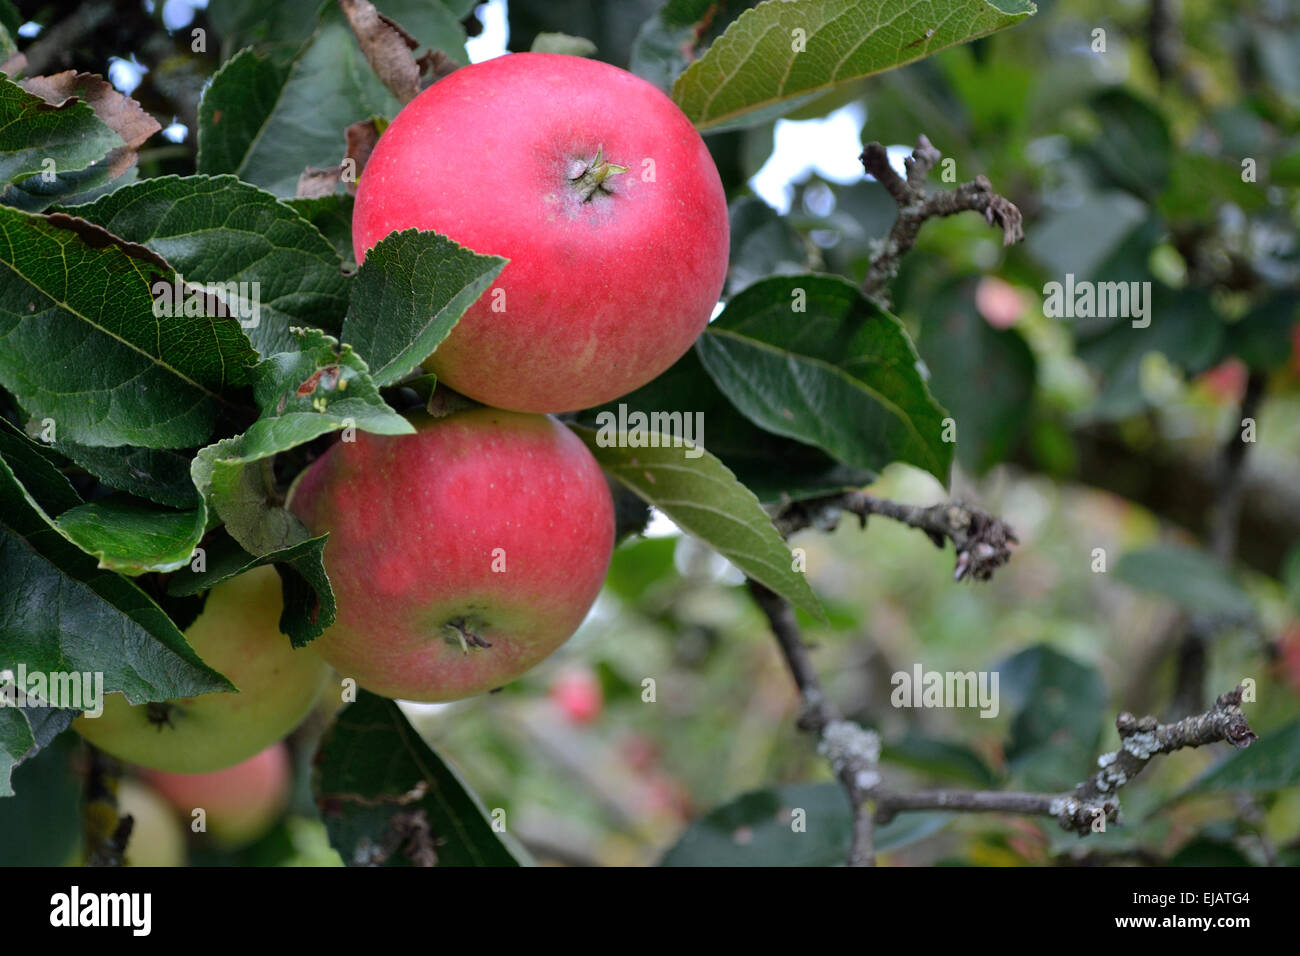 untreated apples on the tree Stock Photo